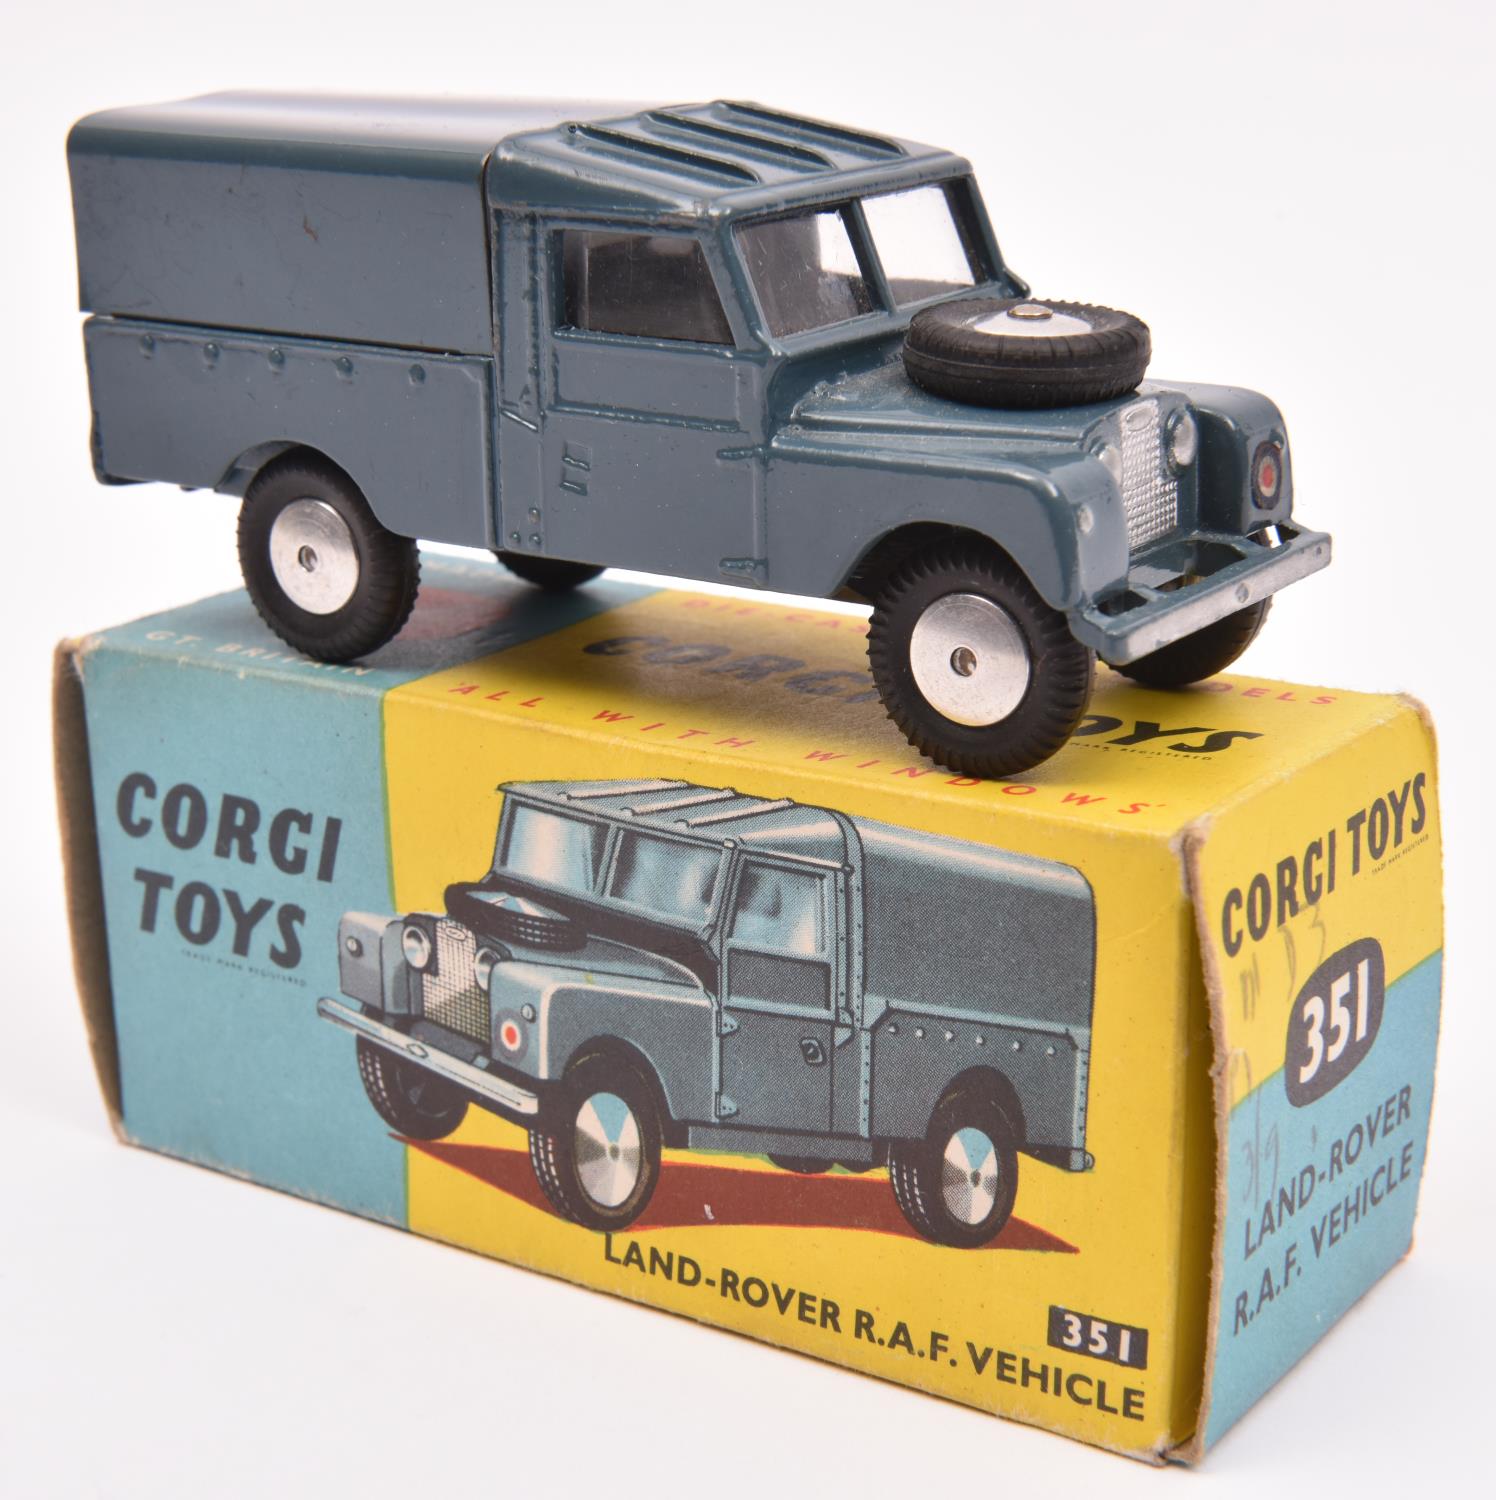 Corgi Toys Land-Rover R.A.F. Vehicle (351). In RAF blue with tin tilt, example with smooth spun